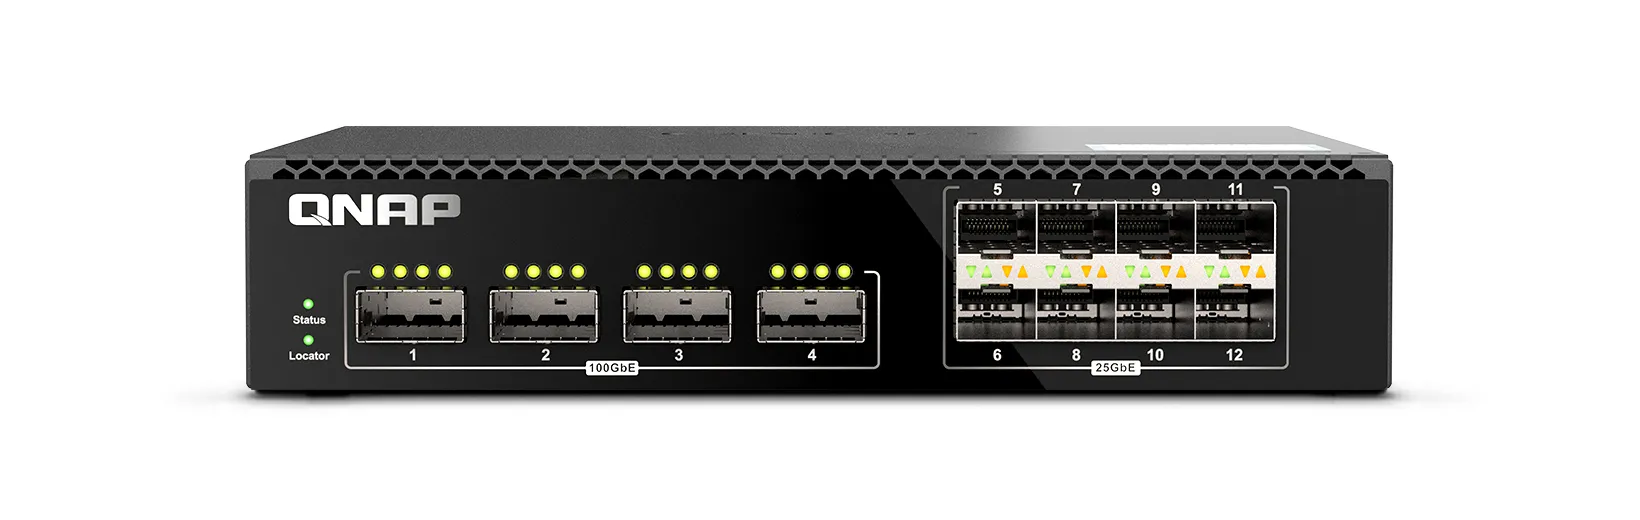 Vente Switchs et Hubs QNAP QSW-M7308R-4X Managed Switch 4 port 100GbE 8